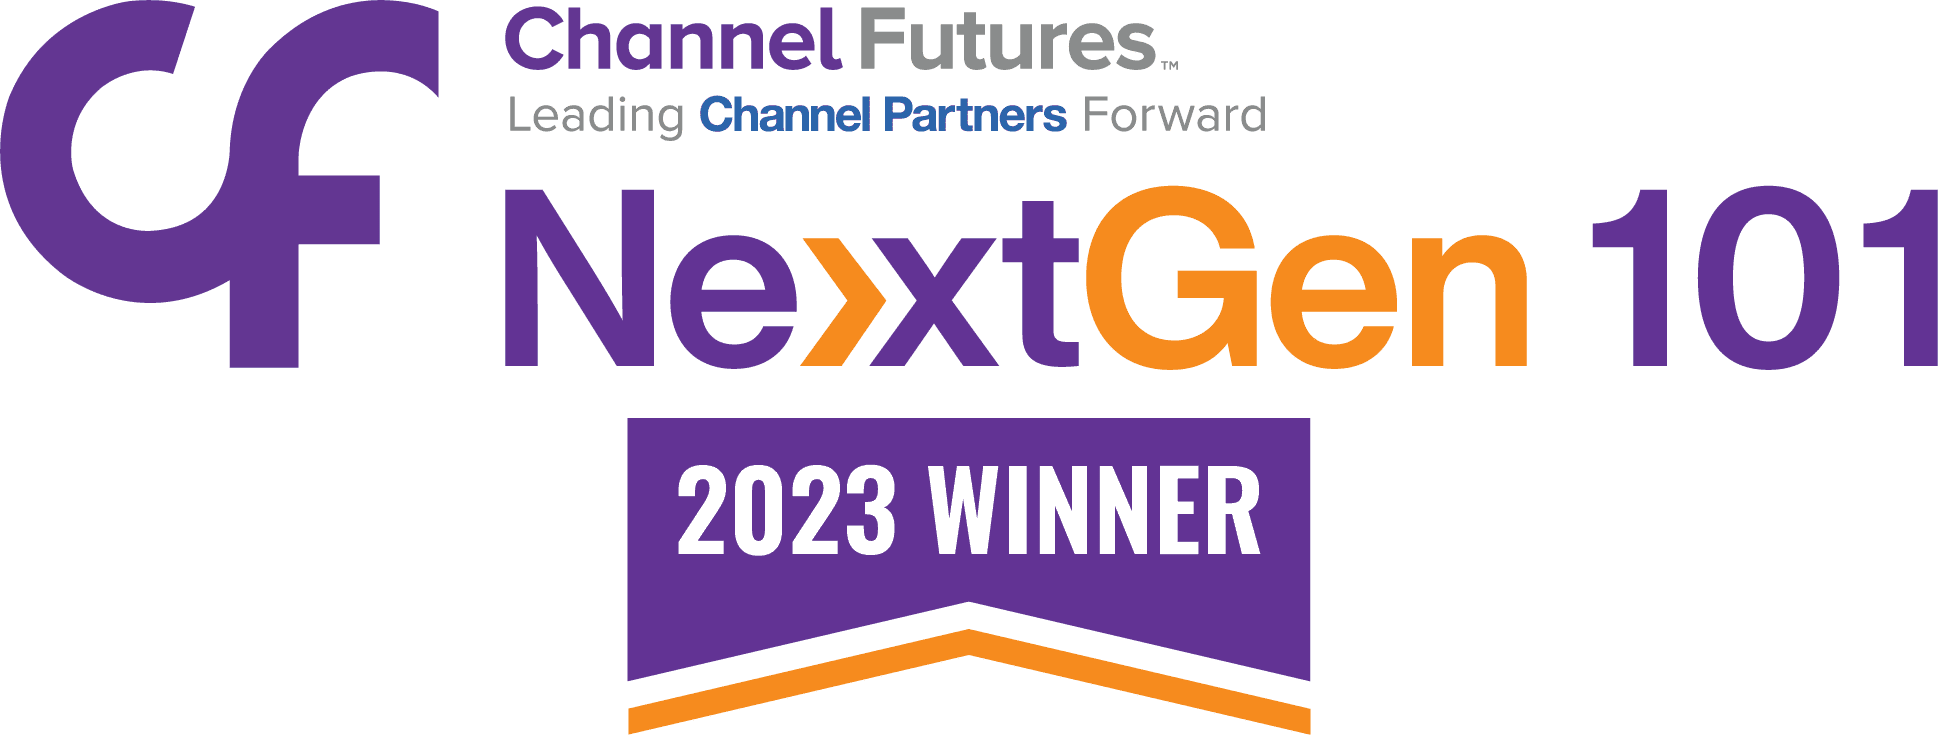 Winner logo for Channel Futures' NextGen 1010, highlighting provider’s excellence in managed IT services for small businesses.